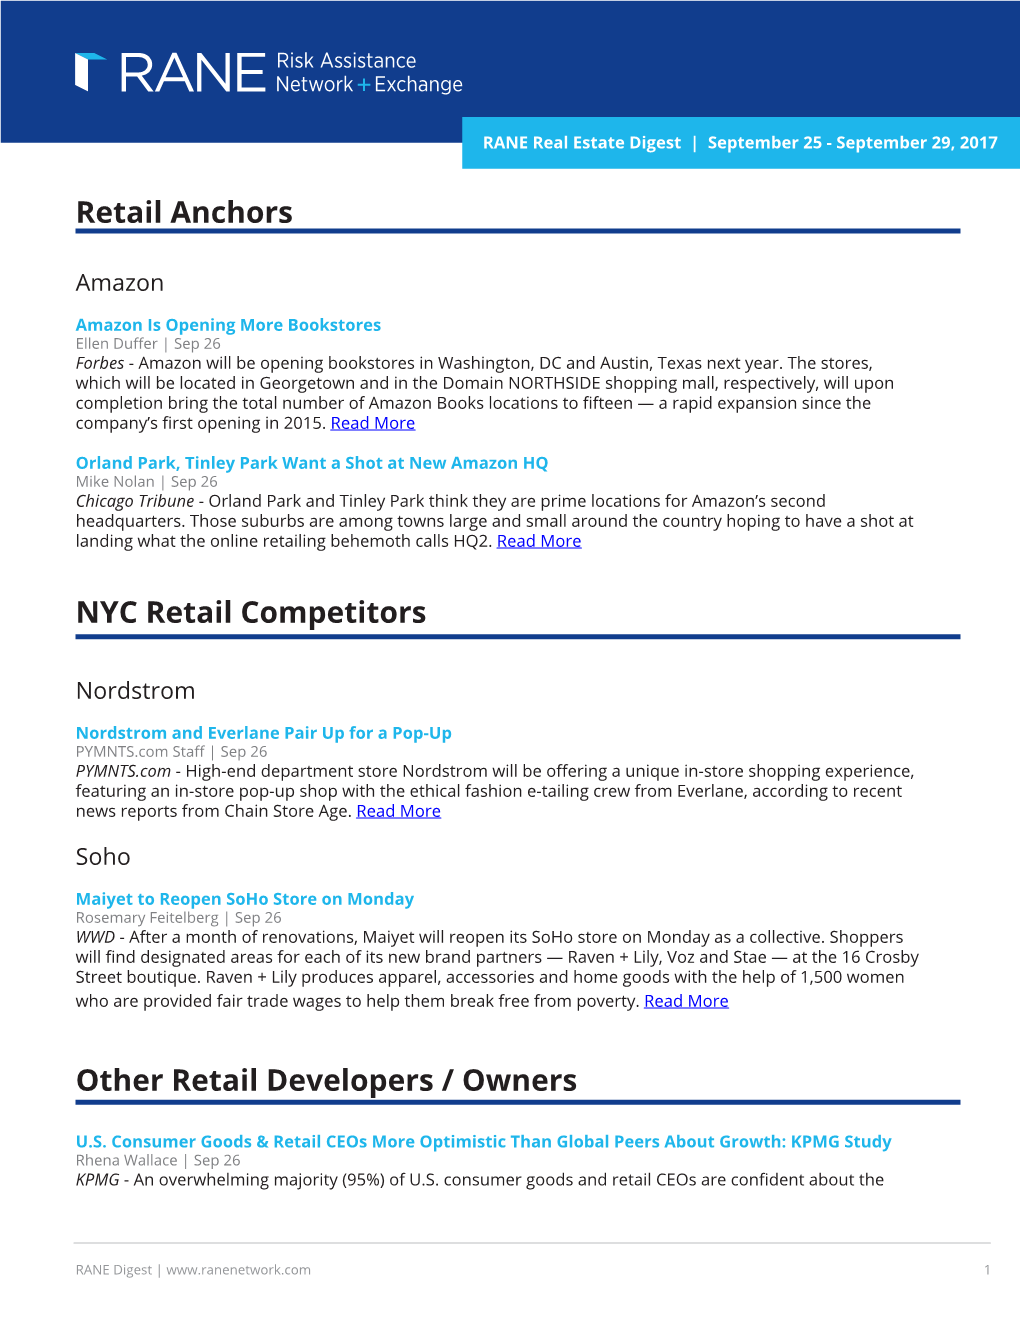 Retail Anchors NYC Retail Competitors Other Retail